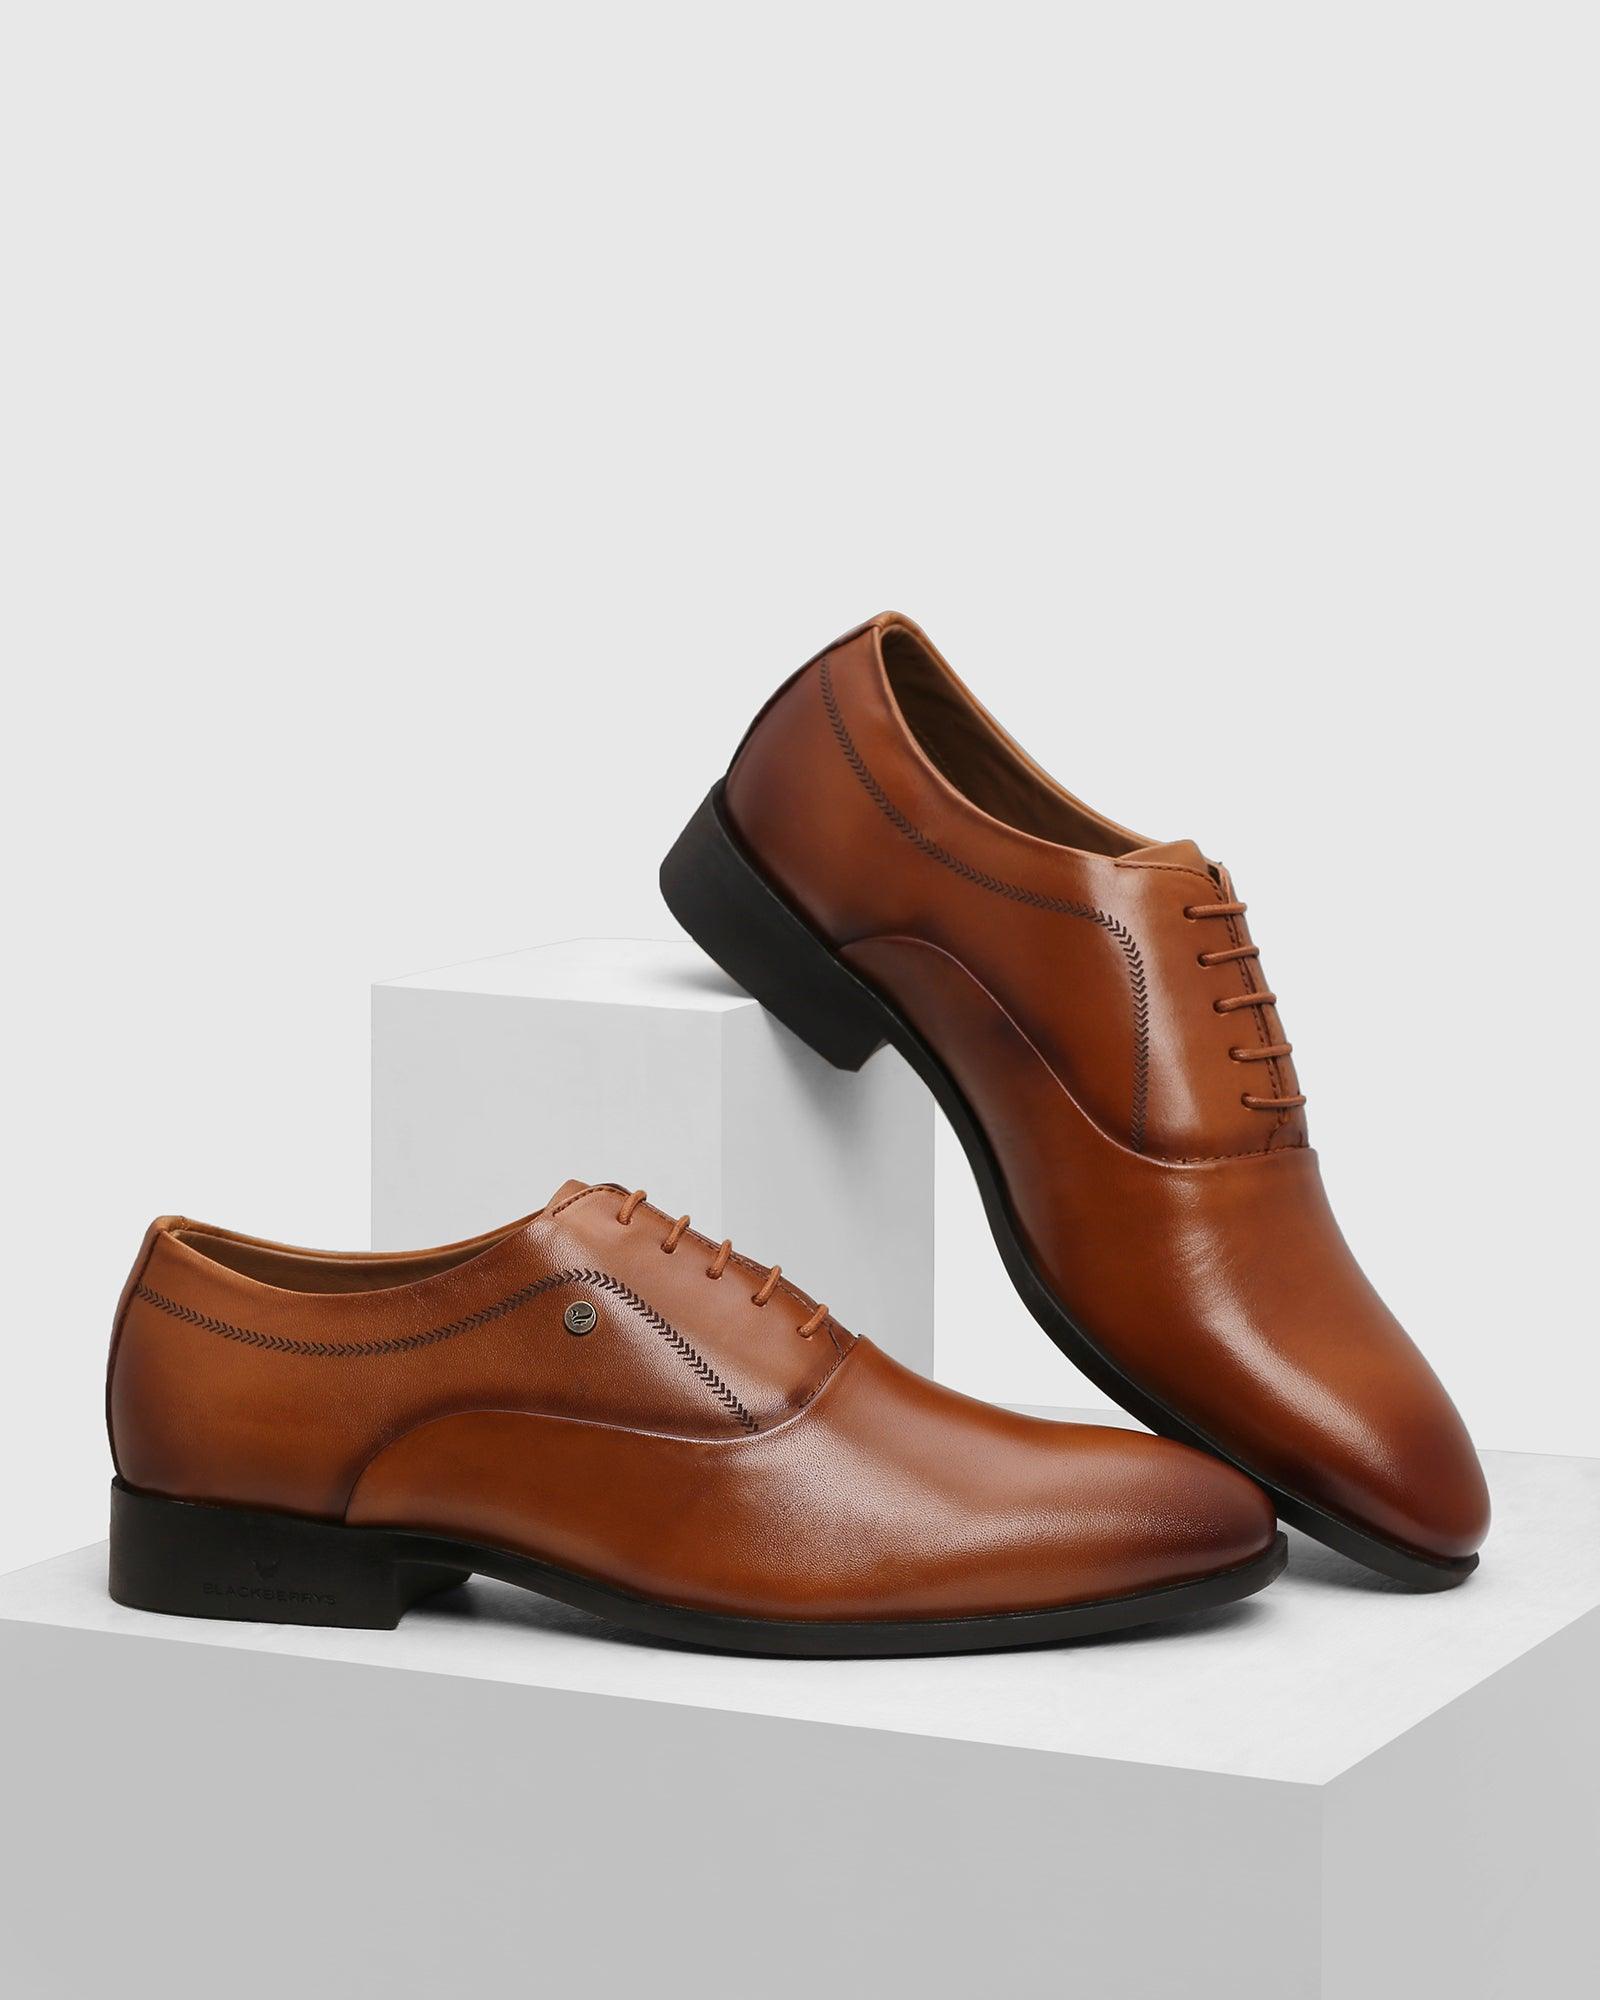 must-haves-leather-tan-textured-oxford-shoes---lebum